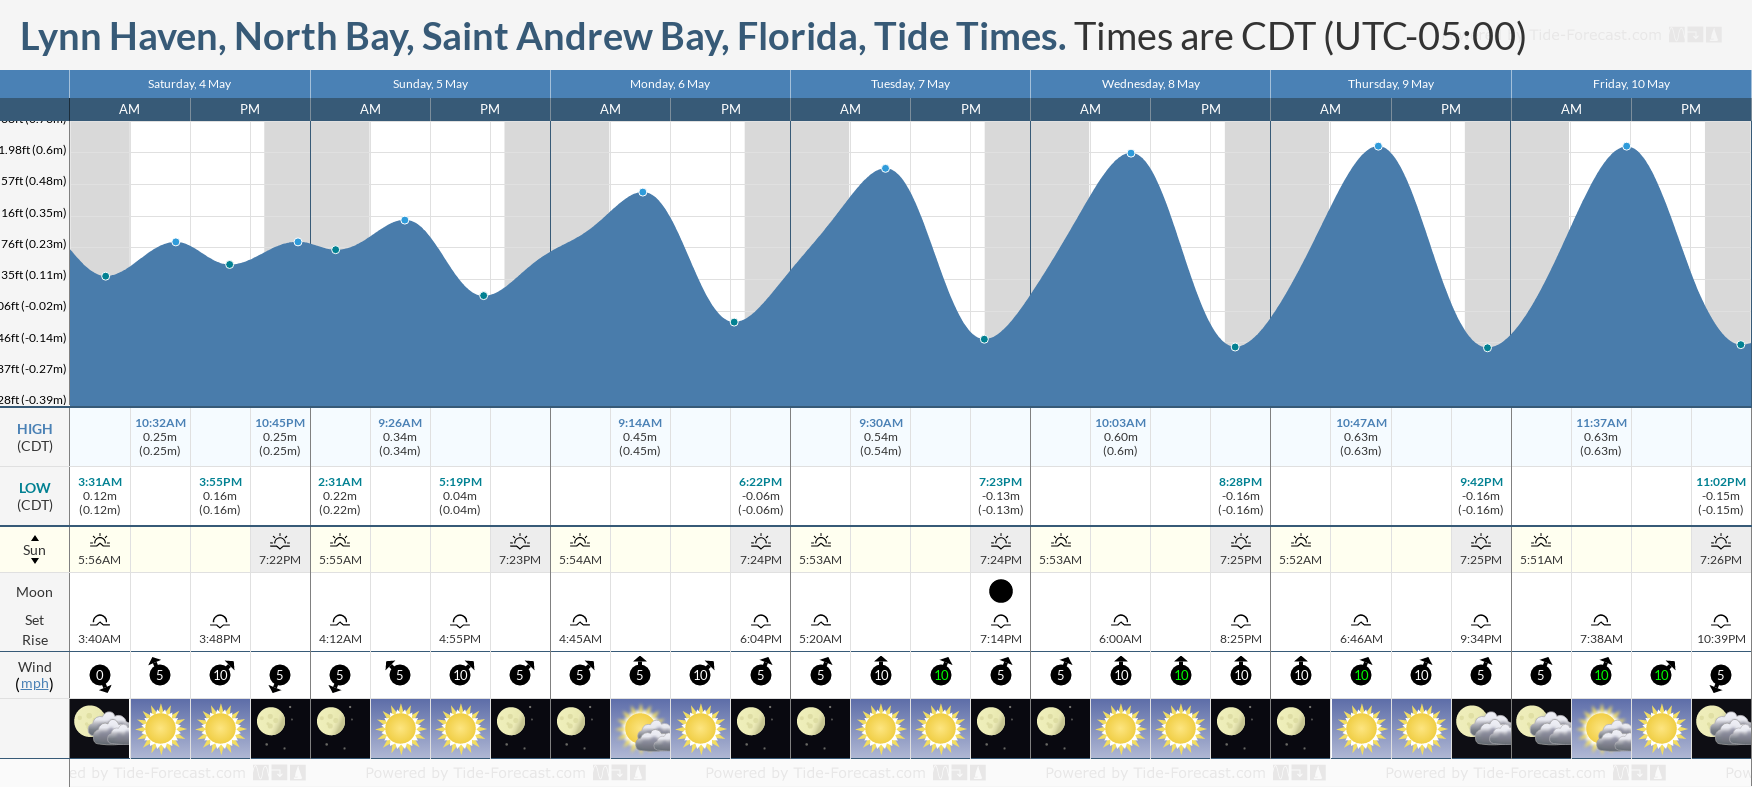 Lynn Haven, North Bay, Saint Andrew Bay, Florida Tide Chart including high and low tide tide times for the next 7 days